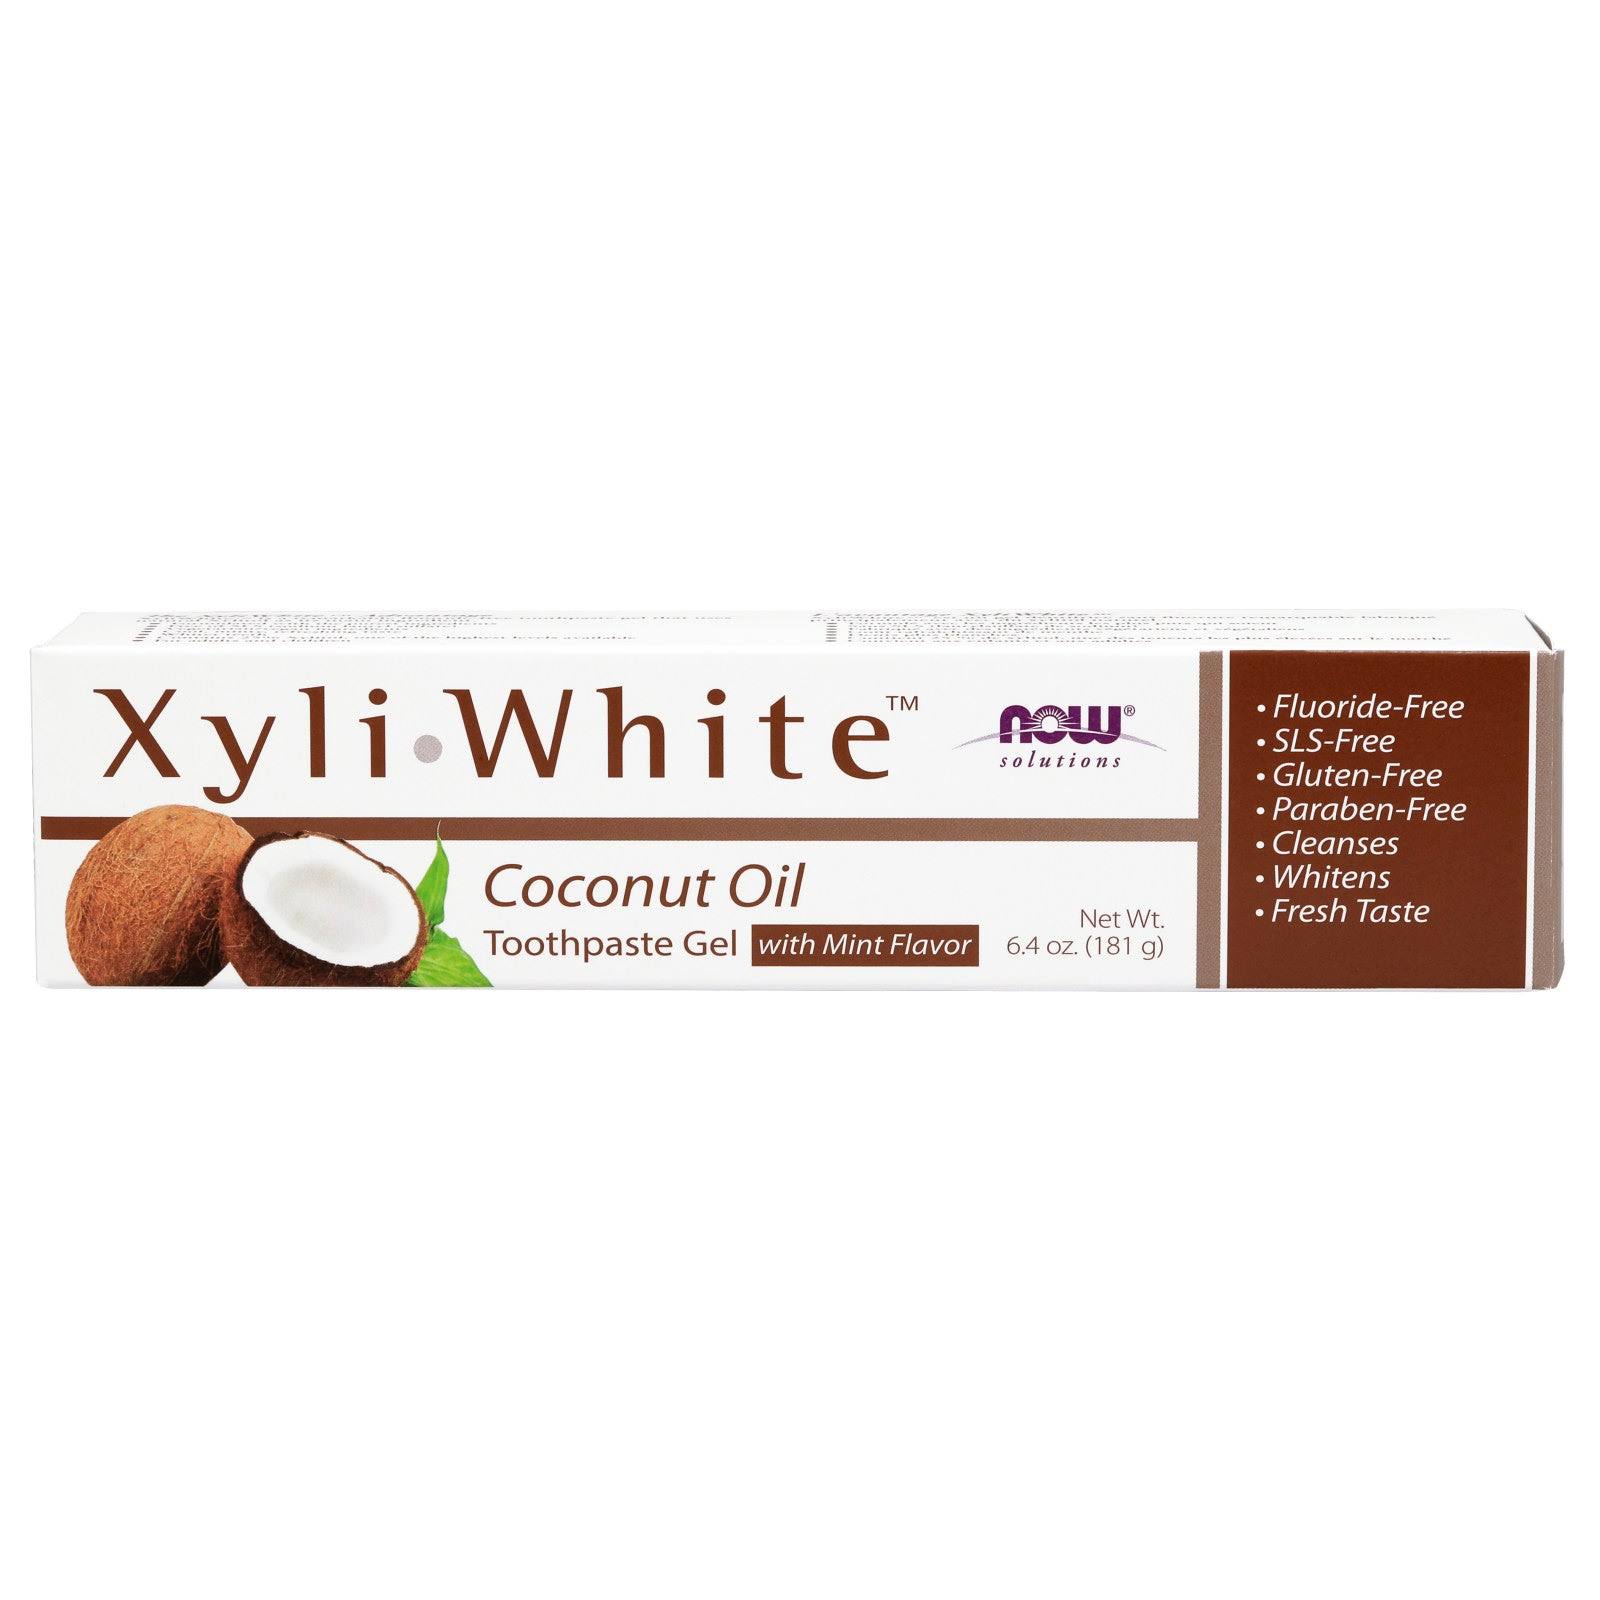 Now Foods Xyliwhite Coconut Oil Toothpaste Gel - 6.4 oz